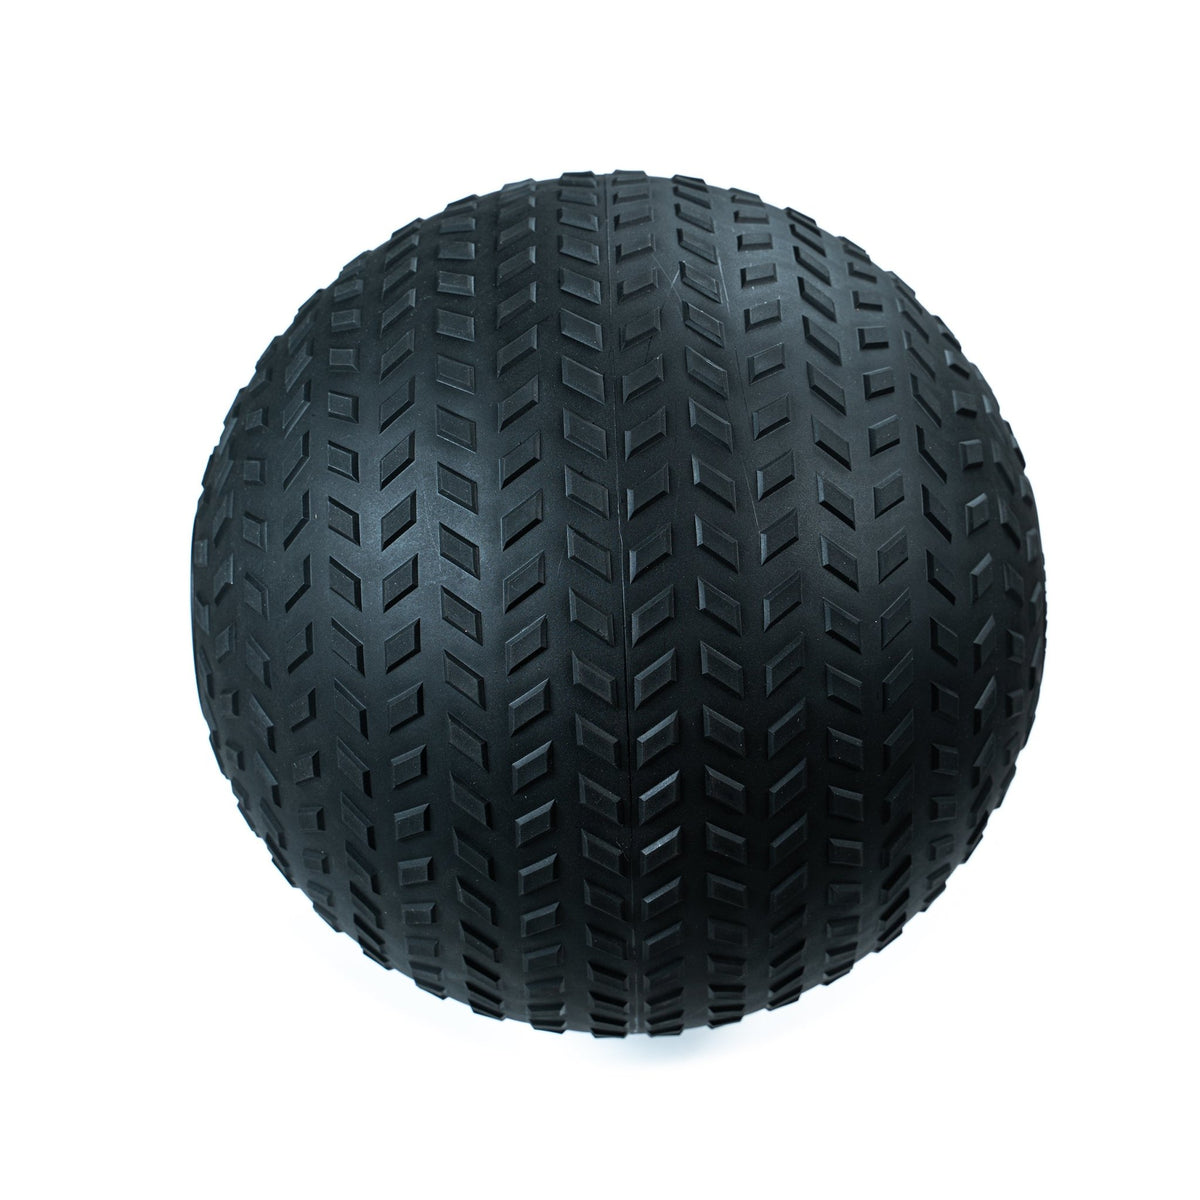 FitWay Equip. Max Grip Slam Ball - 15 Lbs